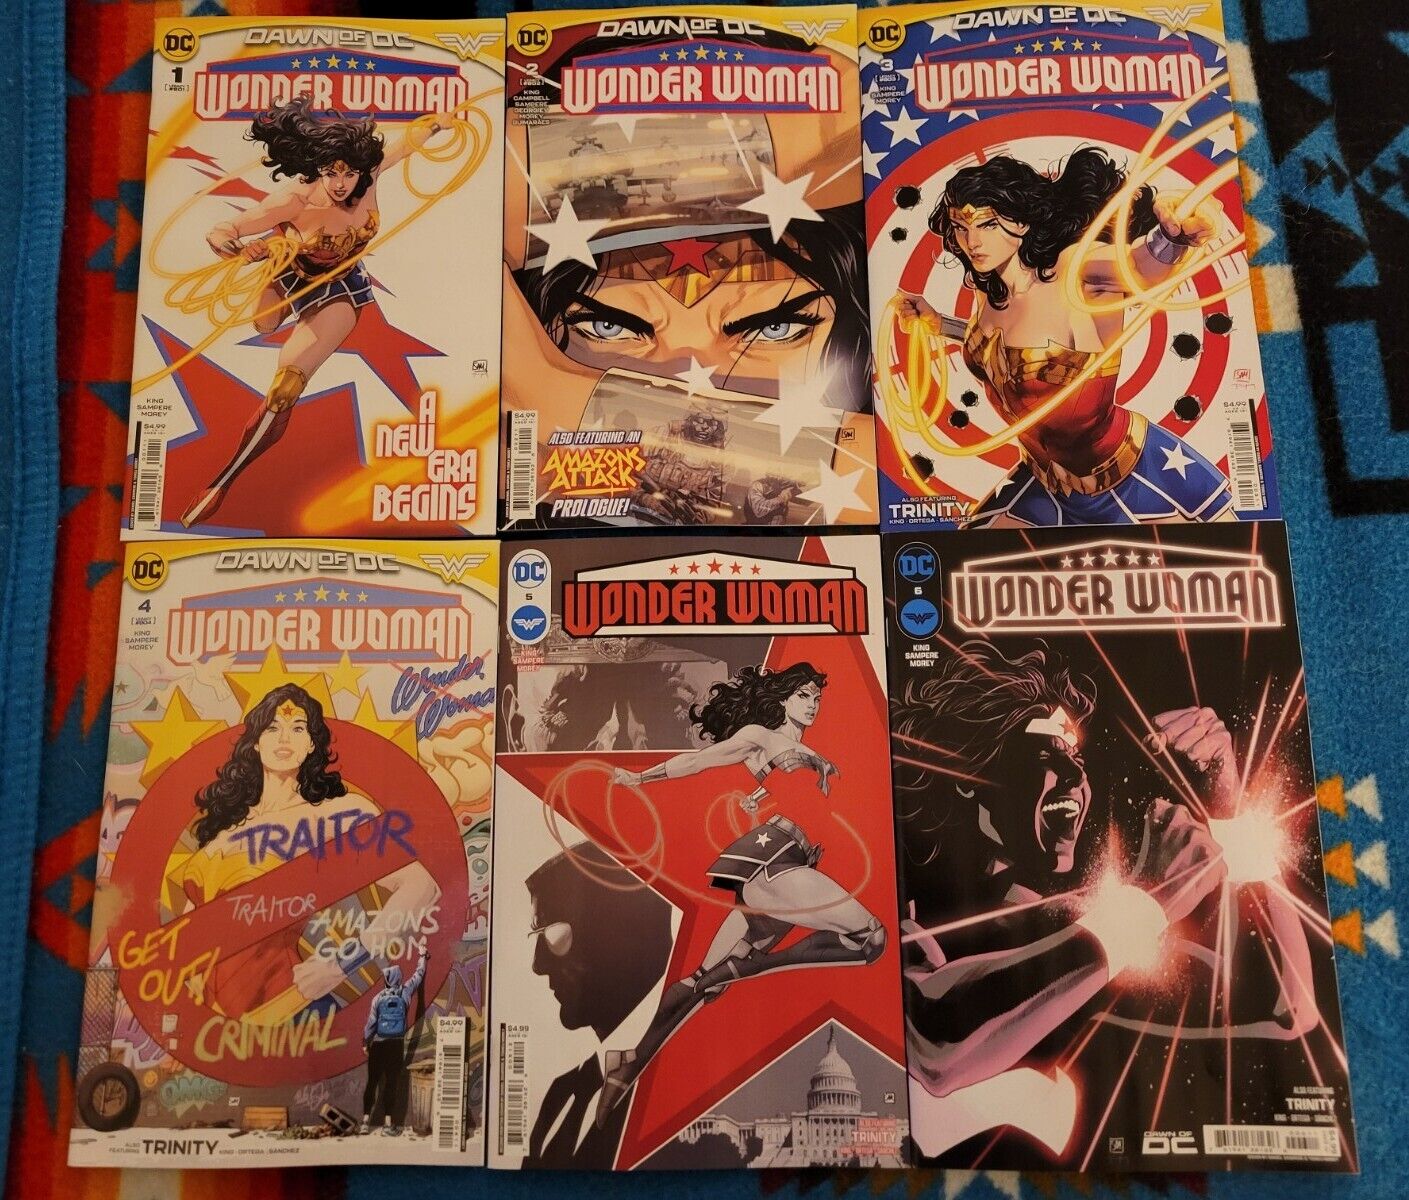 Wonder Woman Vol. 6; Dawn Of DC Lot. Issues 1-6 With Bonus Issue 8